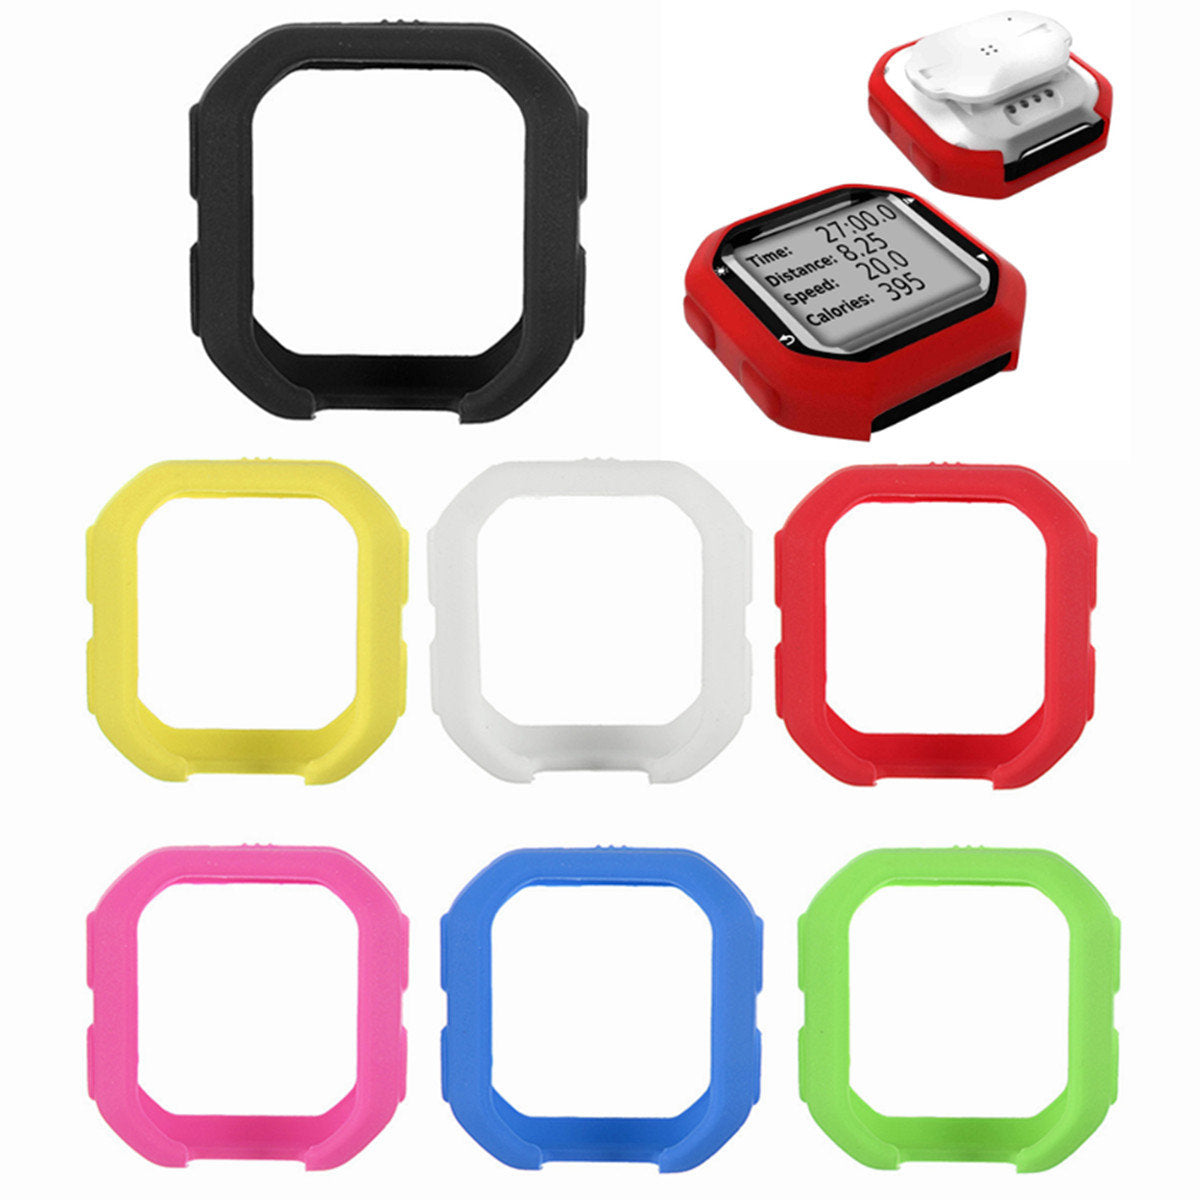 Bike Cycling Silicone Rubber Case Cover Skin For Garmin GPS Edge 20/25 with Sticker